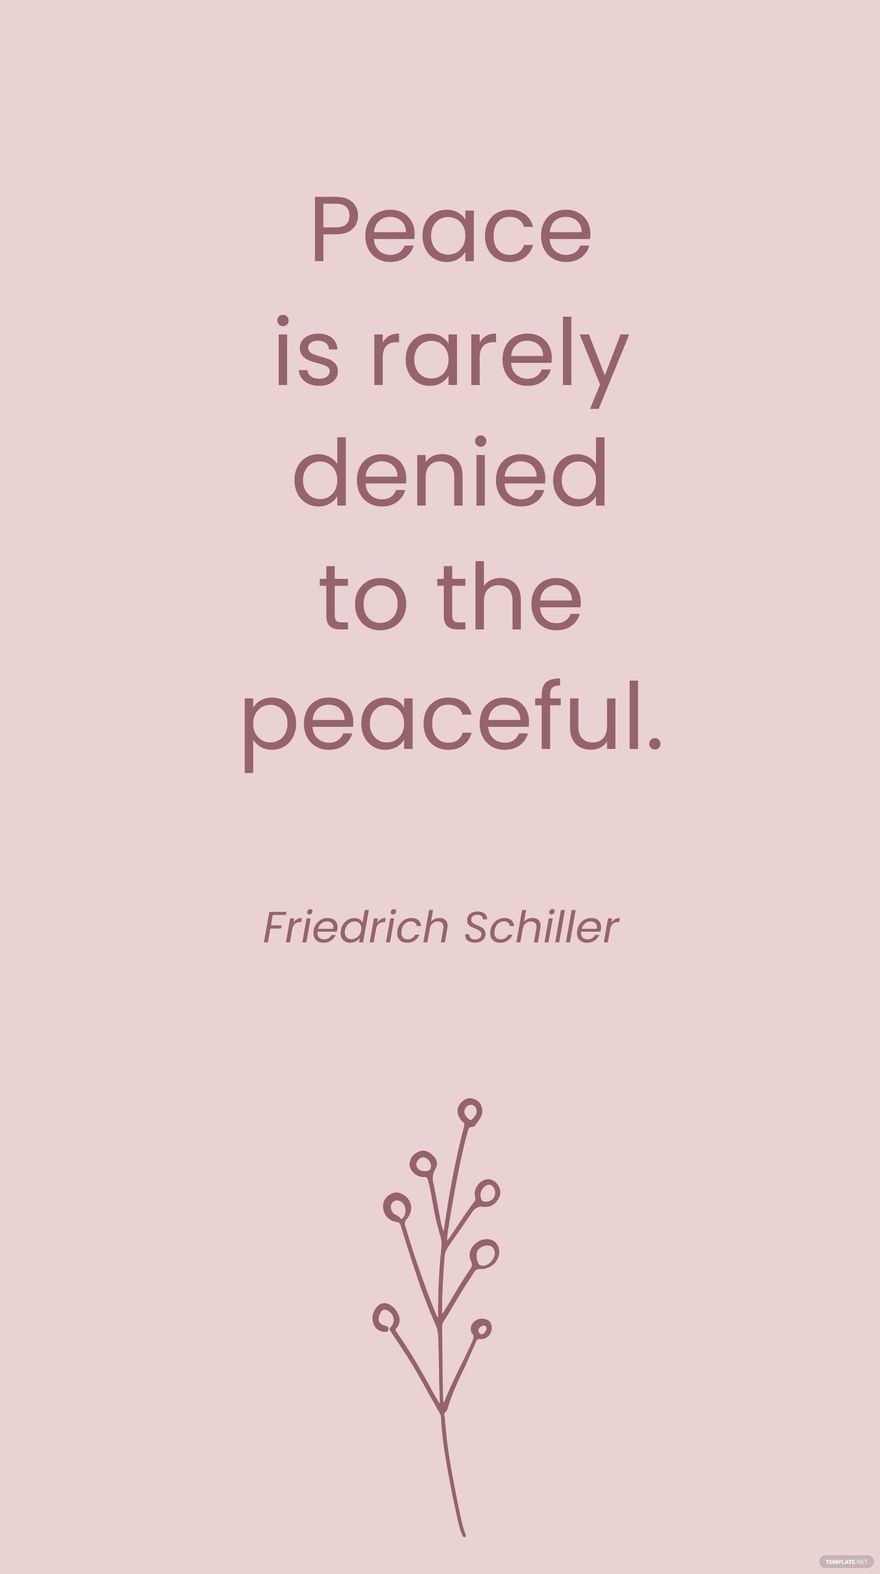 Free Friedrich Schiller - Peace is rarely denied to the peaceful. in JPG